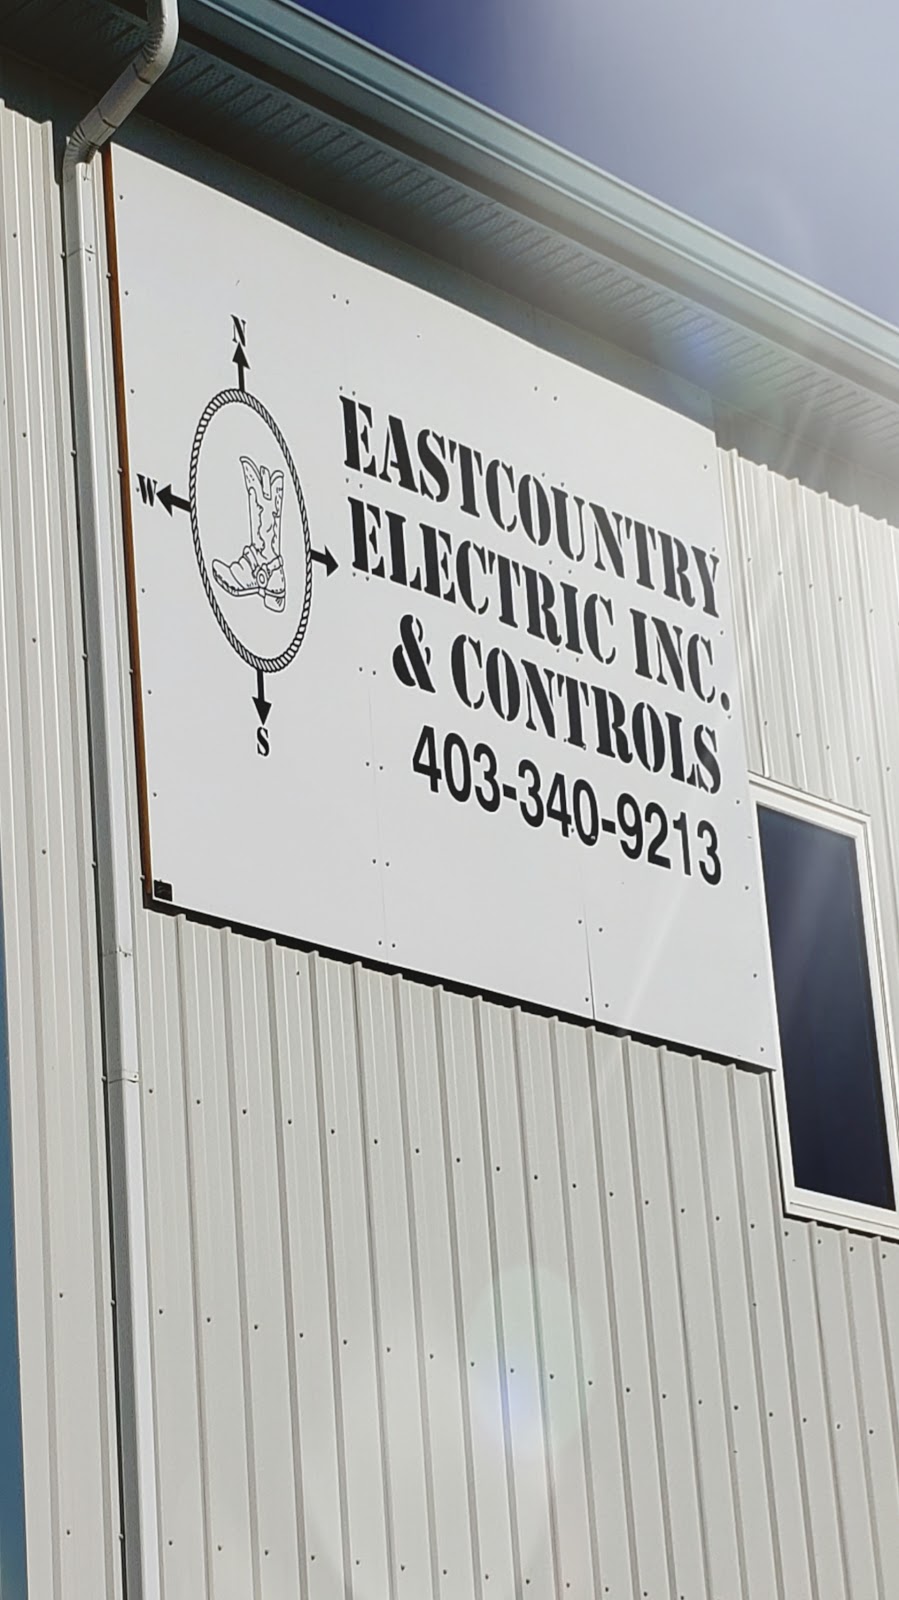 East Country Electric Inc | electrician | RR1, Ponoka, AB T4J 1J2, Canada | 4033409213 OR +1 403-340-9213